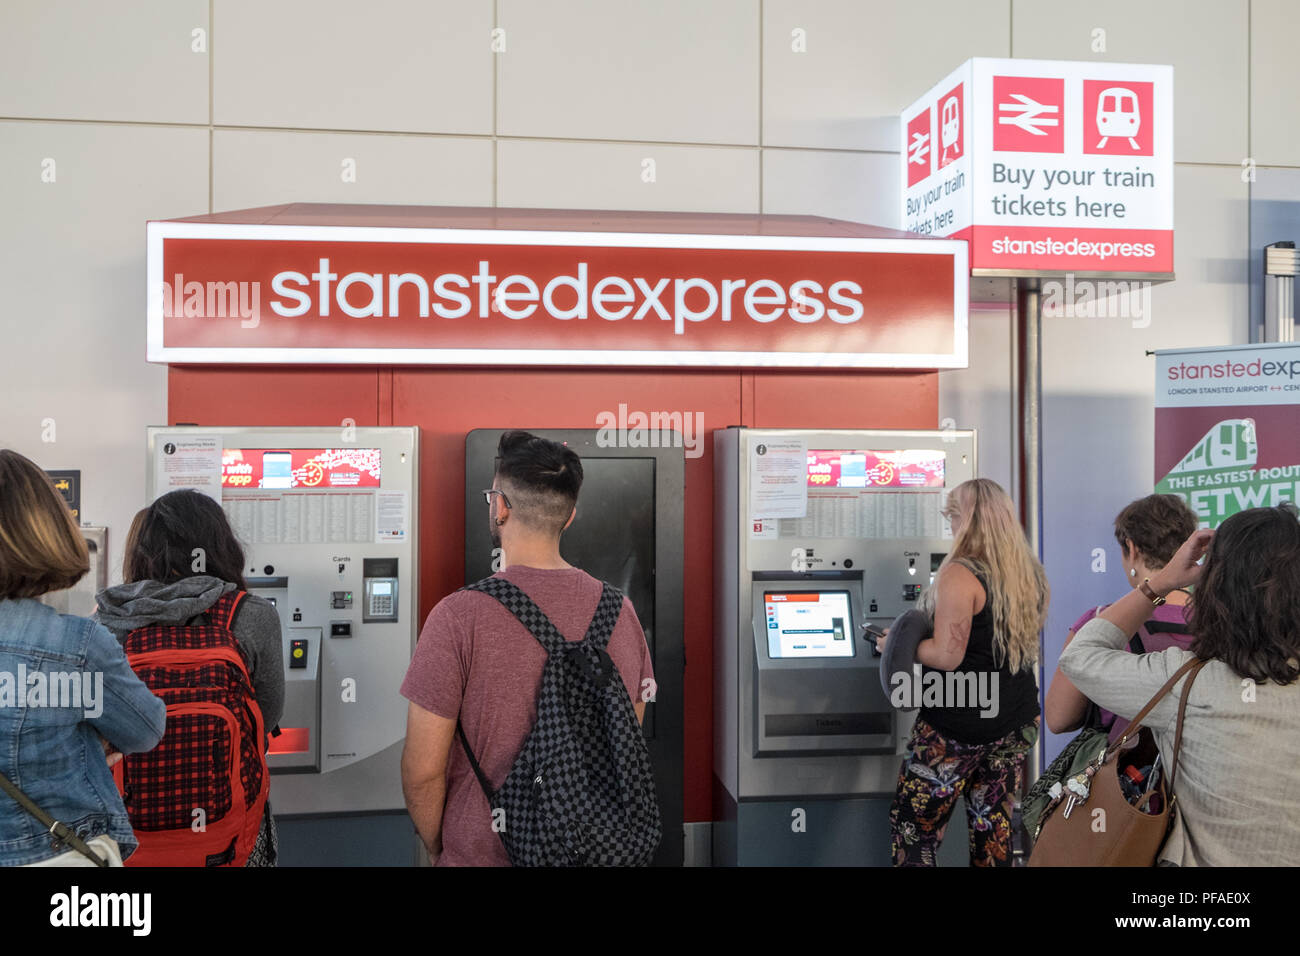 Stansted Express,train,service,ticket,vending,Stansted Airport,arrival,terminal,August,summer,London,Essex,England,Europe,European,passengers,arrival, Stock Photo